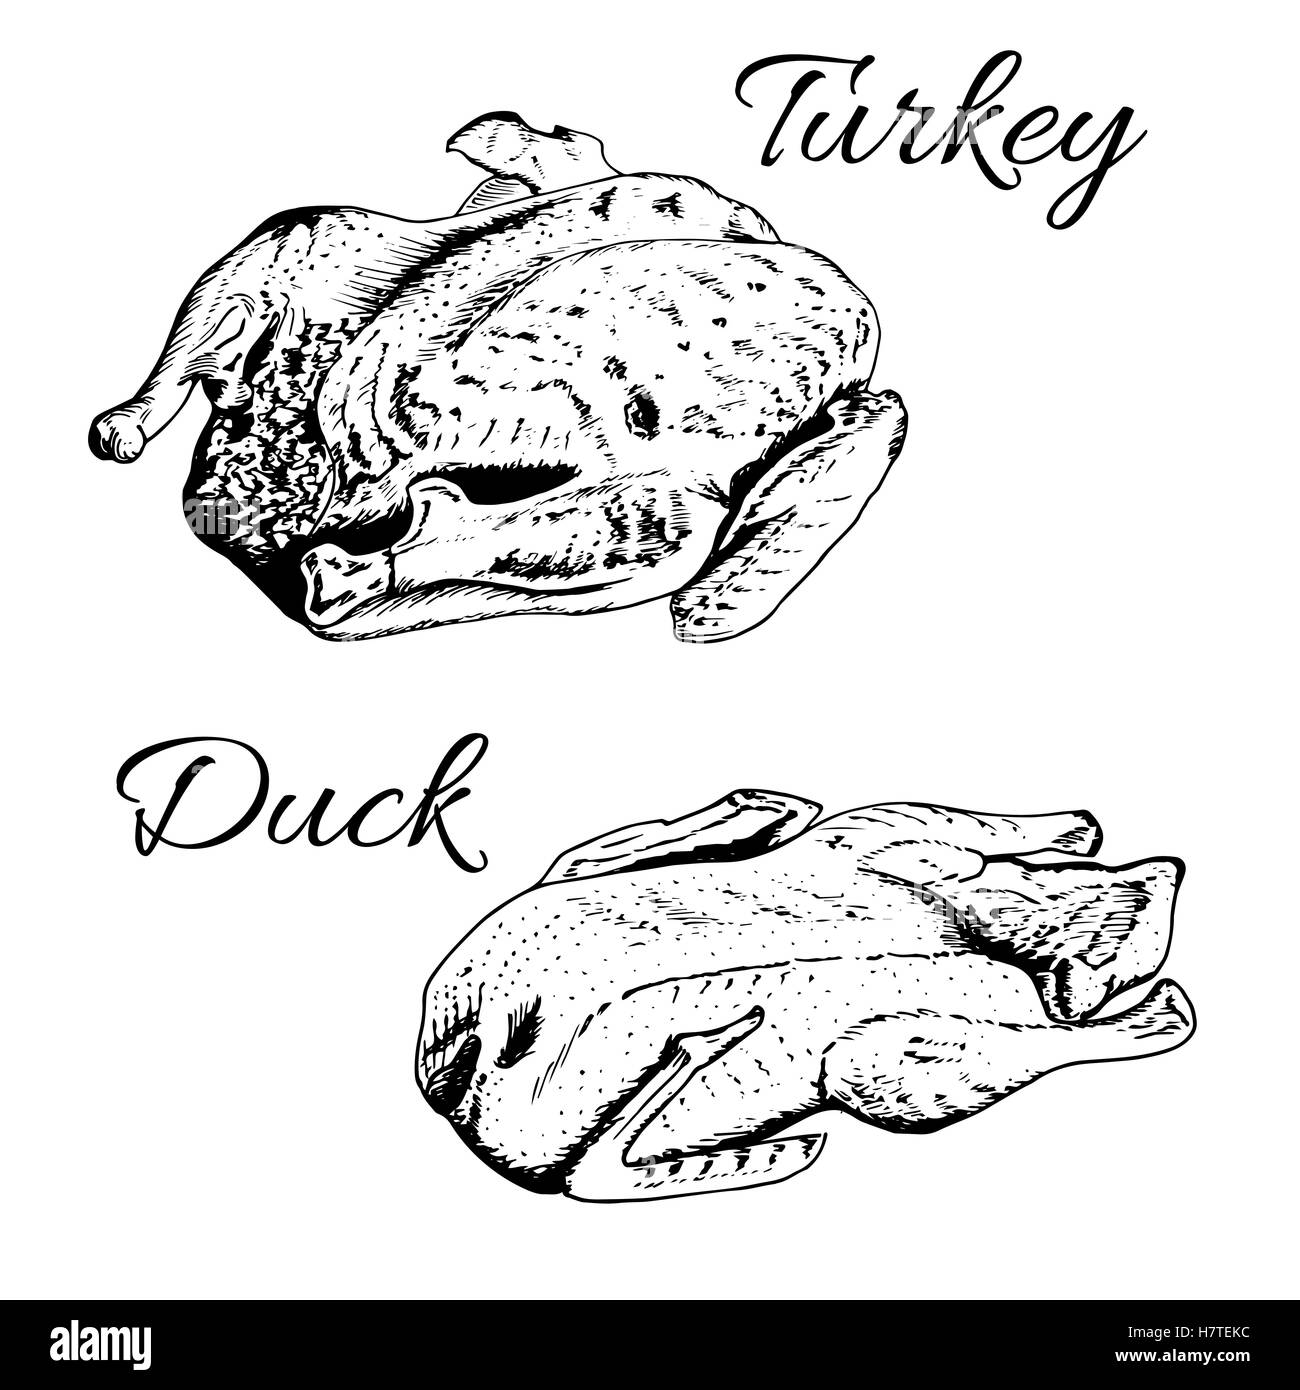 Sketch of turkey and duck. Stock Vector